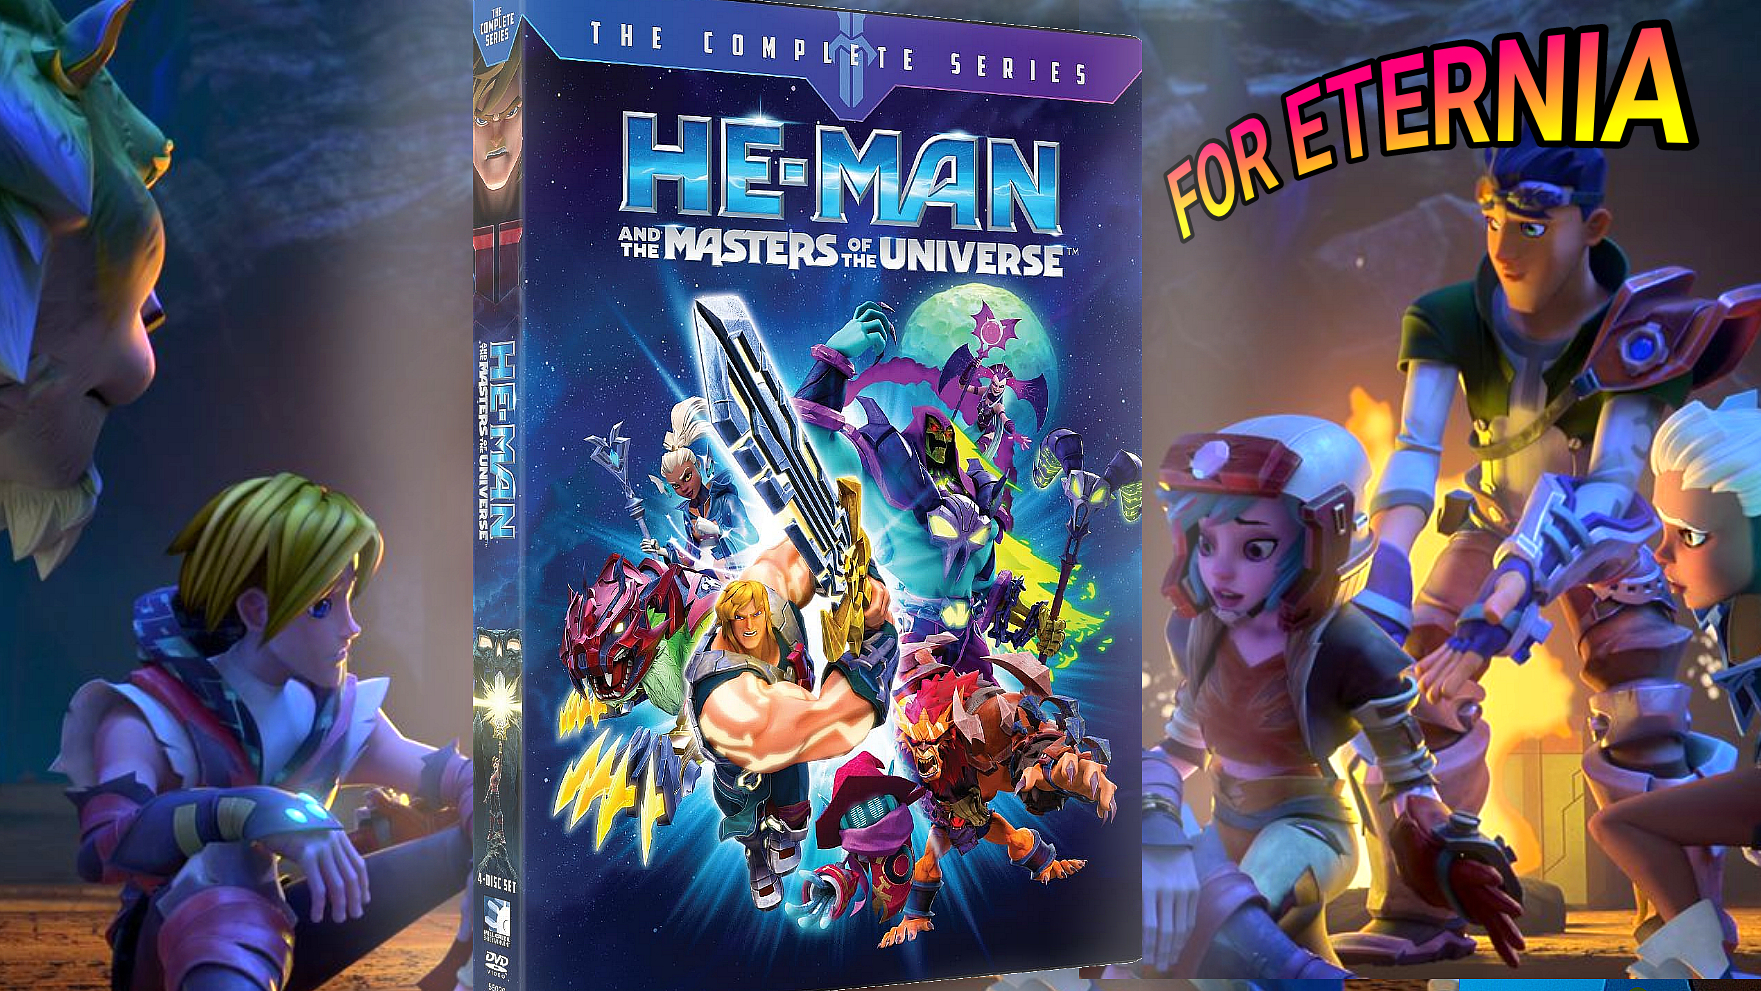 ”He-Man and the Masters of the Universe: The Complete Series” comes to DVD October 10th!